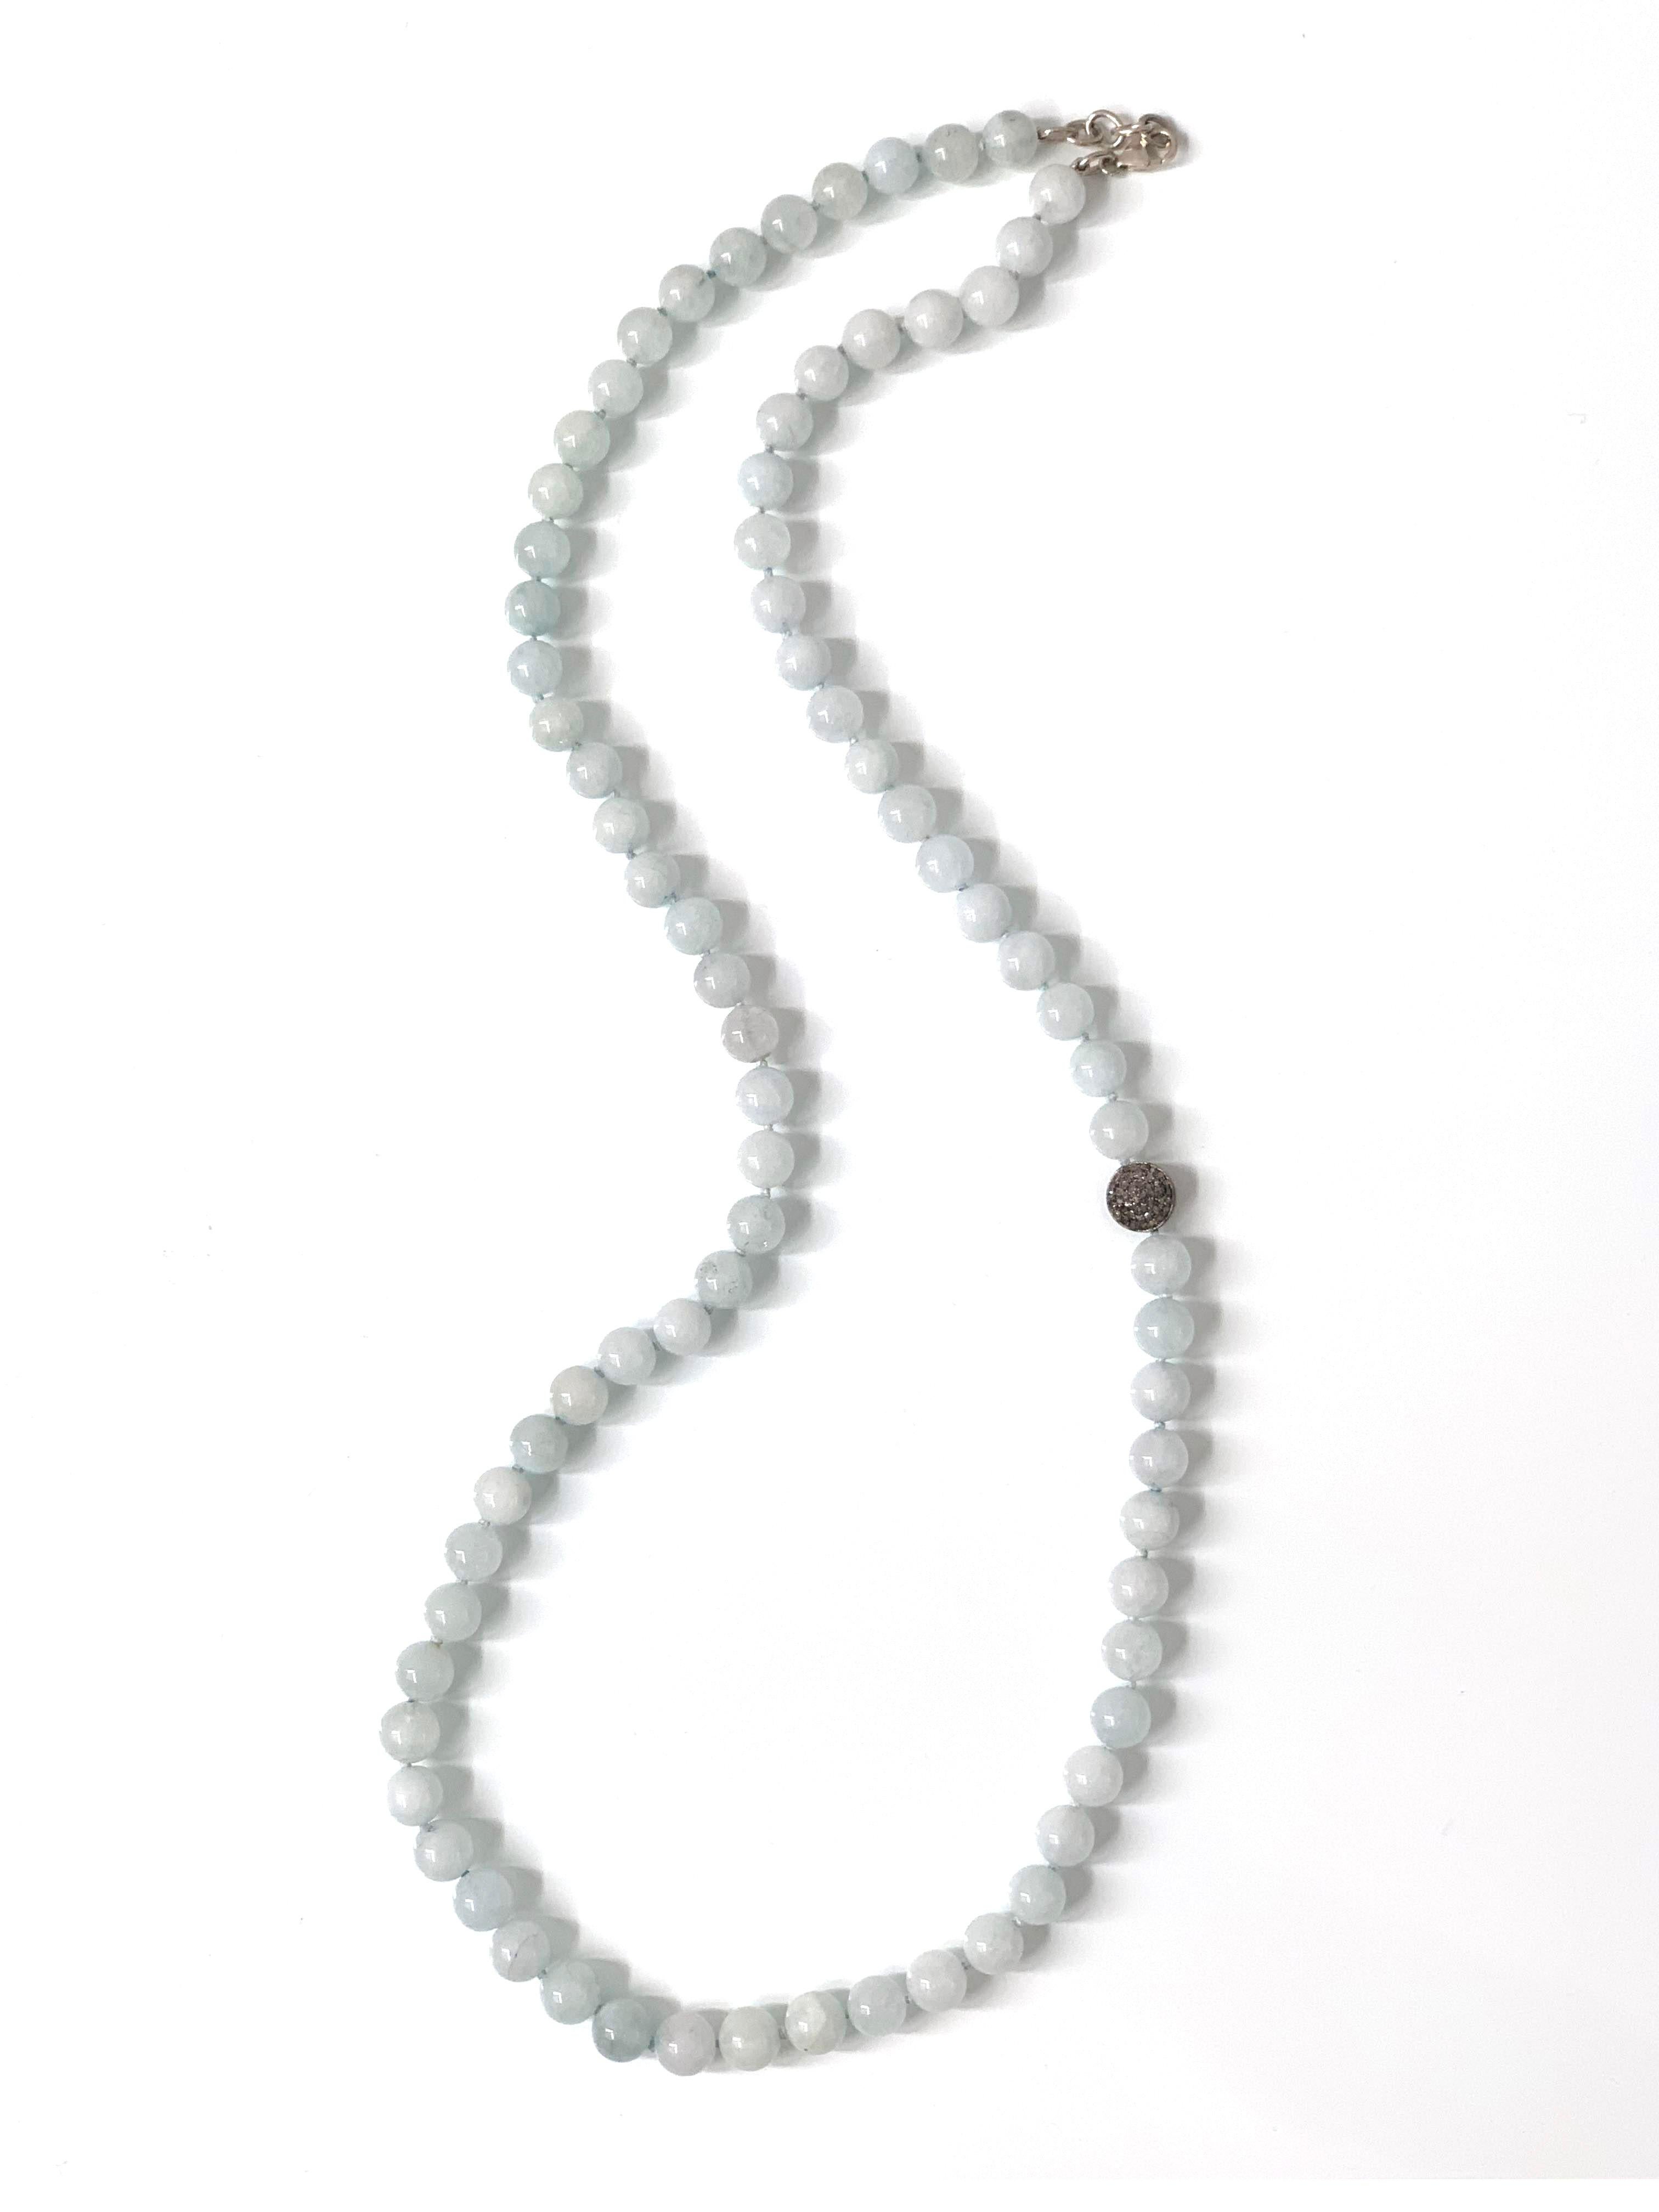 This beautiful pale blue African Aquamarine and Champagne Diamond bead necklace is the perfect addition to your jewelry collection. The African Aquamarine beads are 11mm diameter strung together with double-sided pave champagne diamond disc given